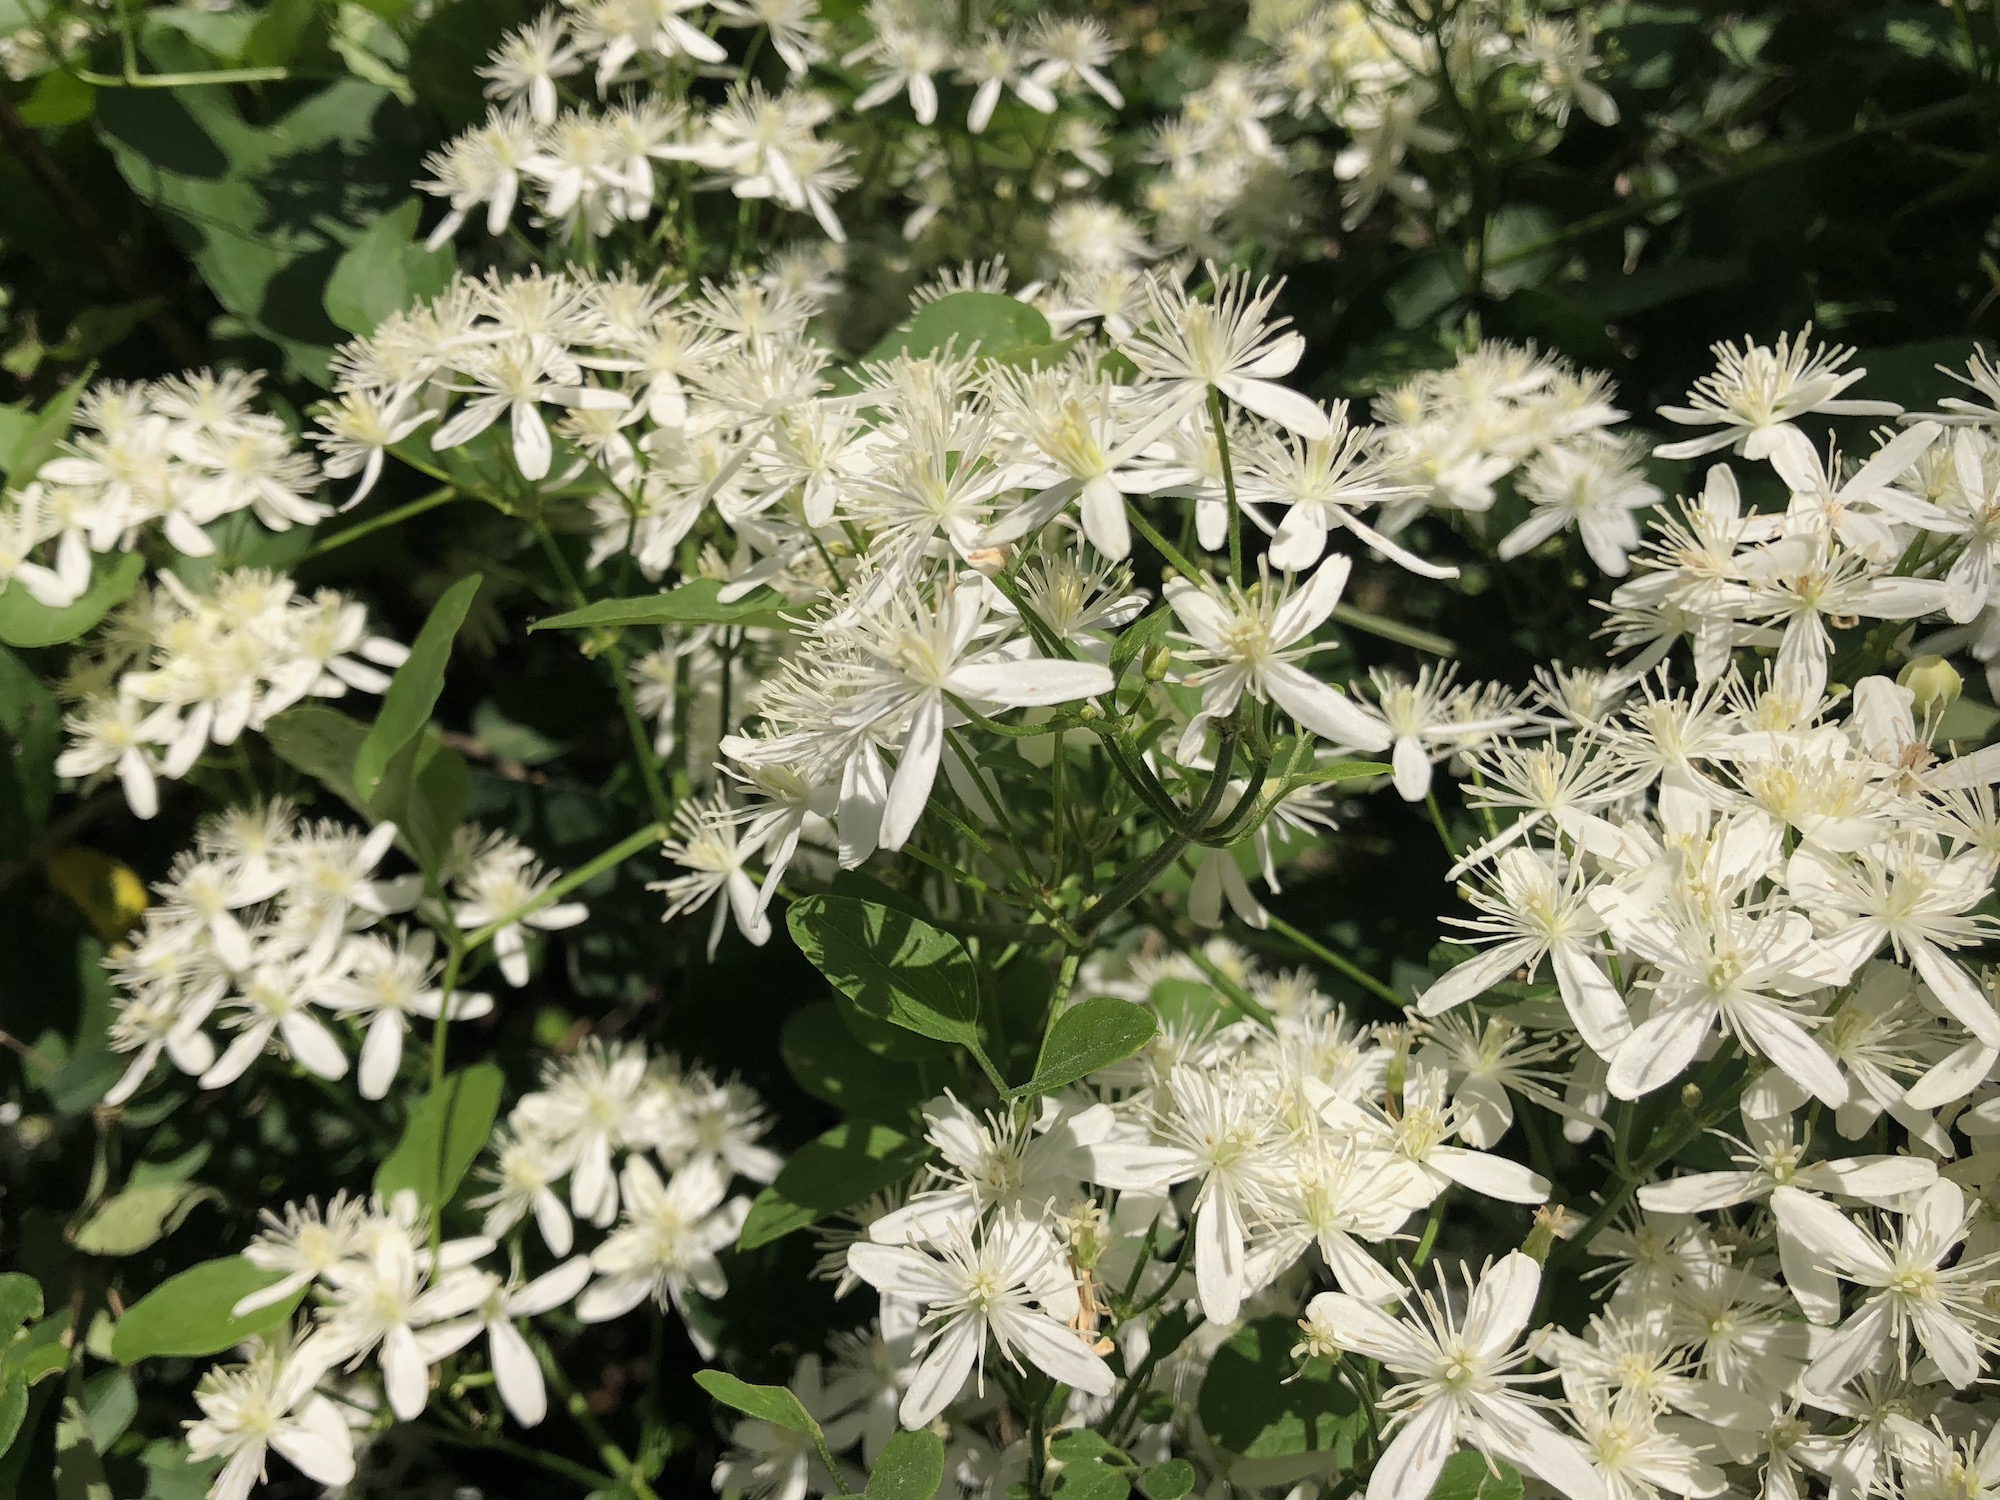 Sweet Autumn Clematis along bike path behind Gregory Street  in Madison, Wisconsin on July 4, 2021.